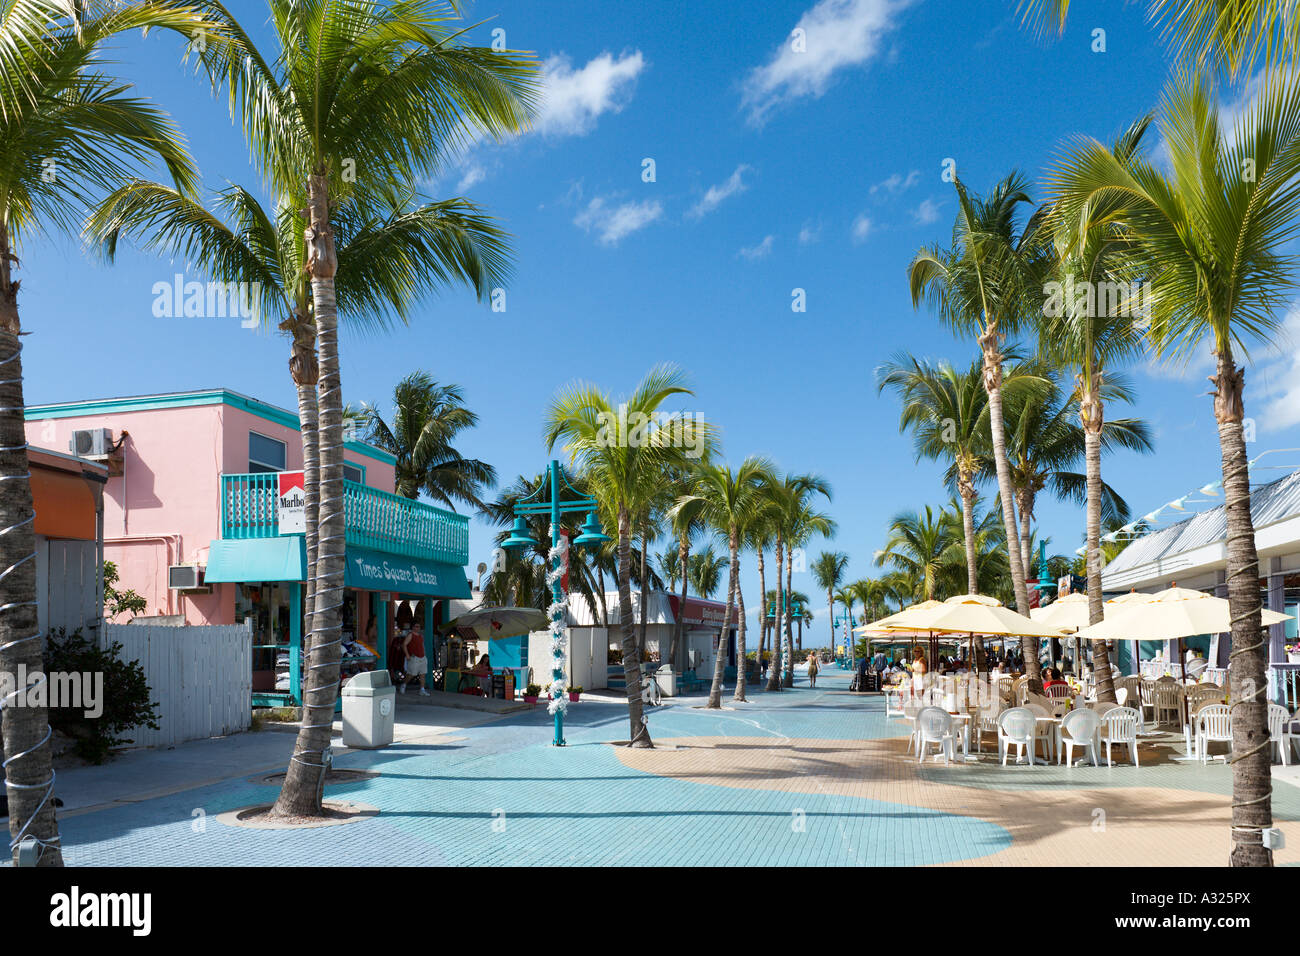 Cafes and Shops in the resort centre, Estero Island, Fort Myers Beach, Gulf Coast, Florida, USA Stock Photo